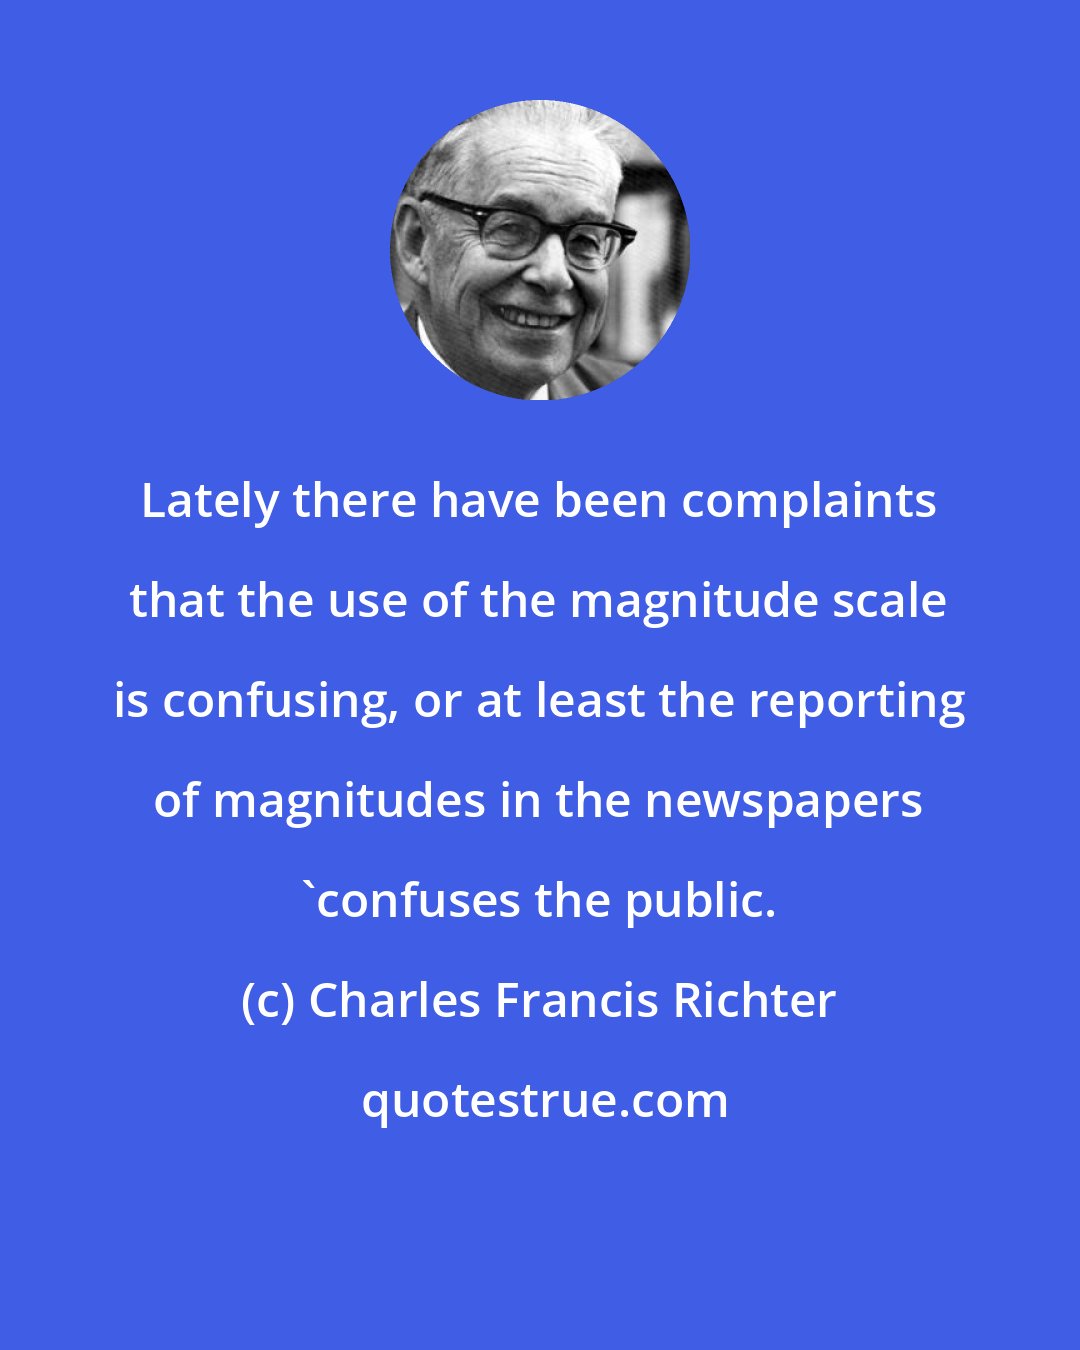 Charles Francis Richter: Lately there have been complaints that the use of the magnitude scale is confusing, or at least the reporting of magnitudes in the newspapers 'confuses the public.